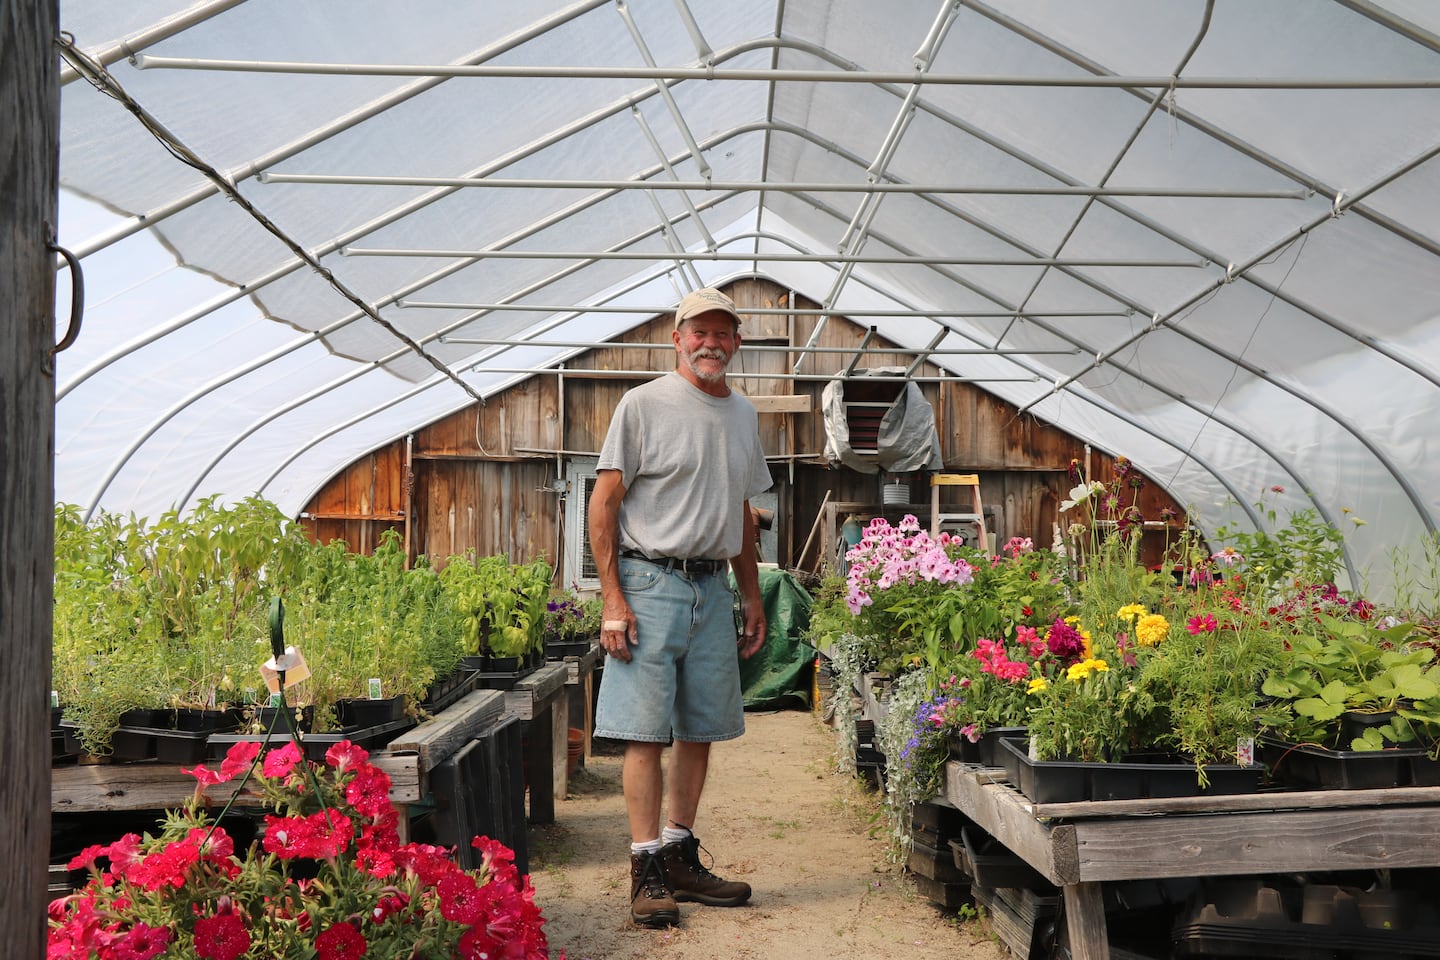 Todd Reed of Fitzwilliam, N.H., helped recruit a team of volunteers to put a new plastic cover on the greenhouse where Frances Bullock sells flowers and vegetables.